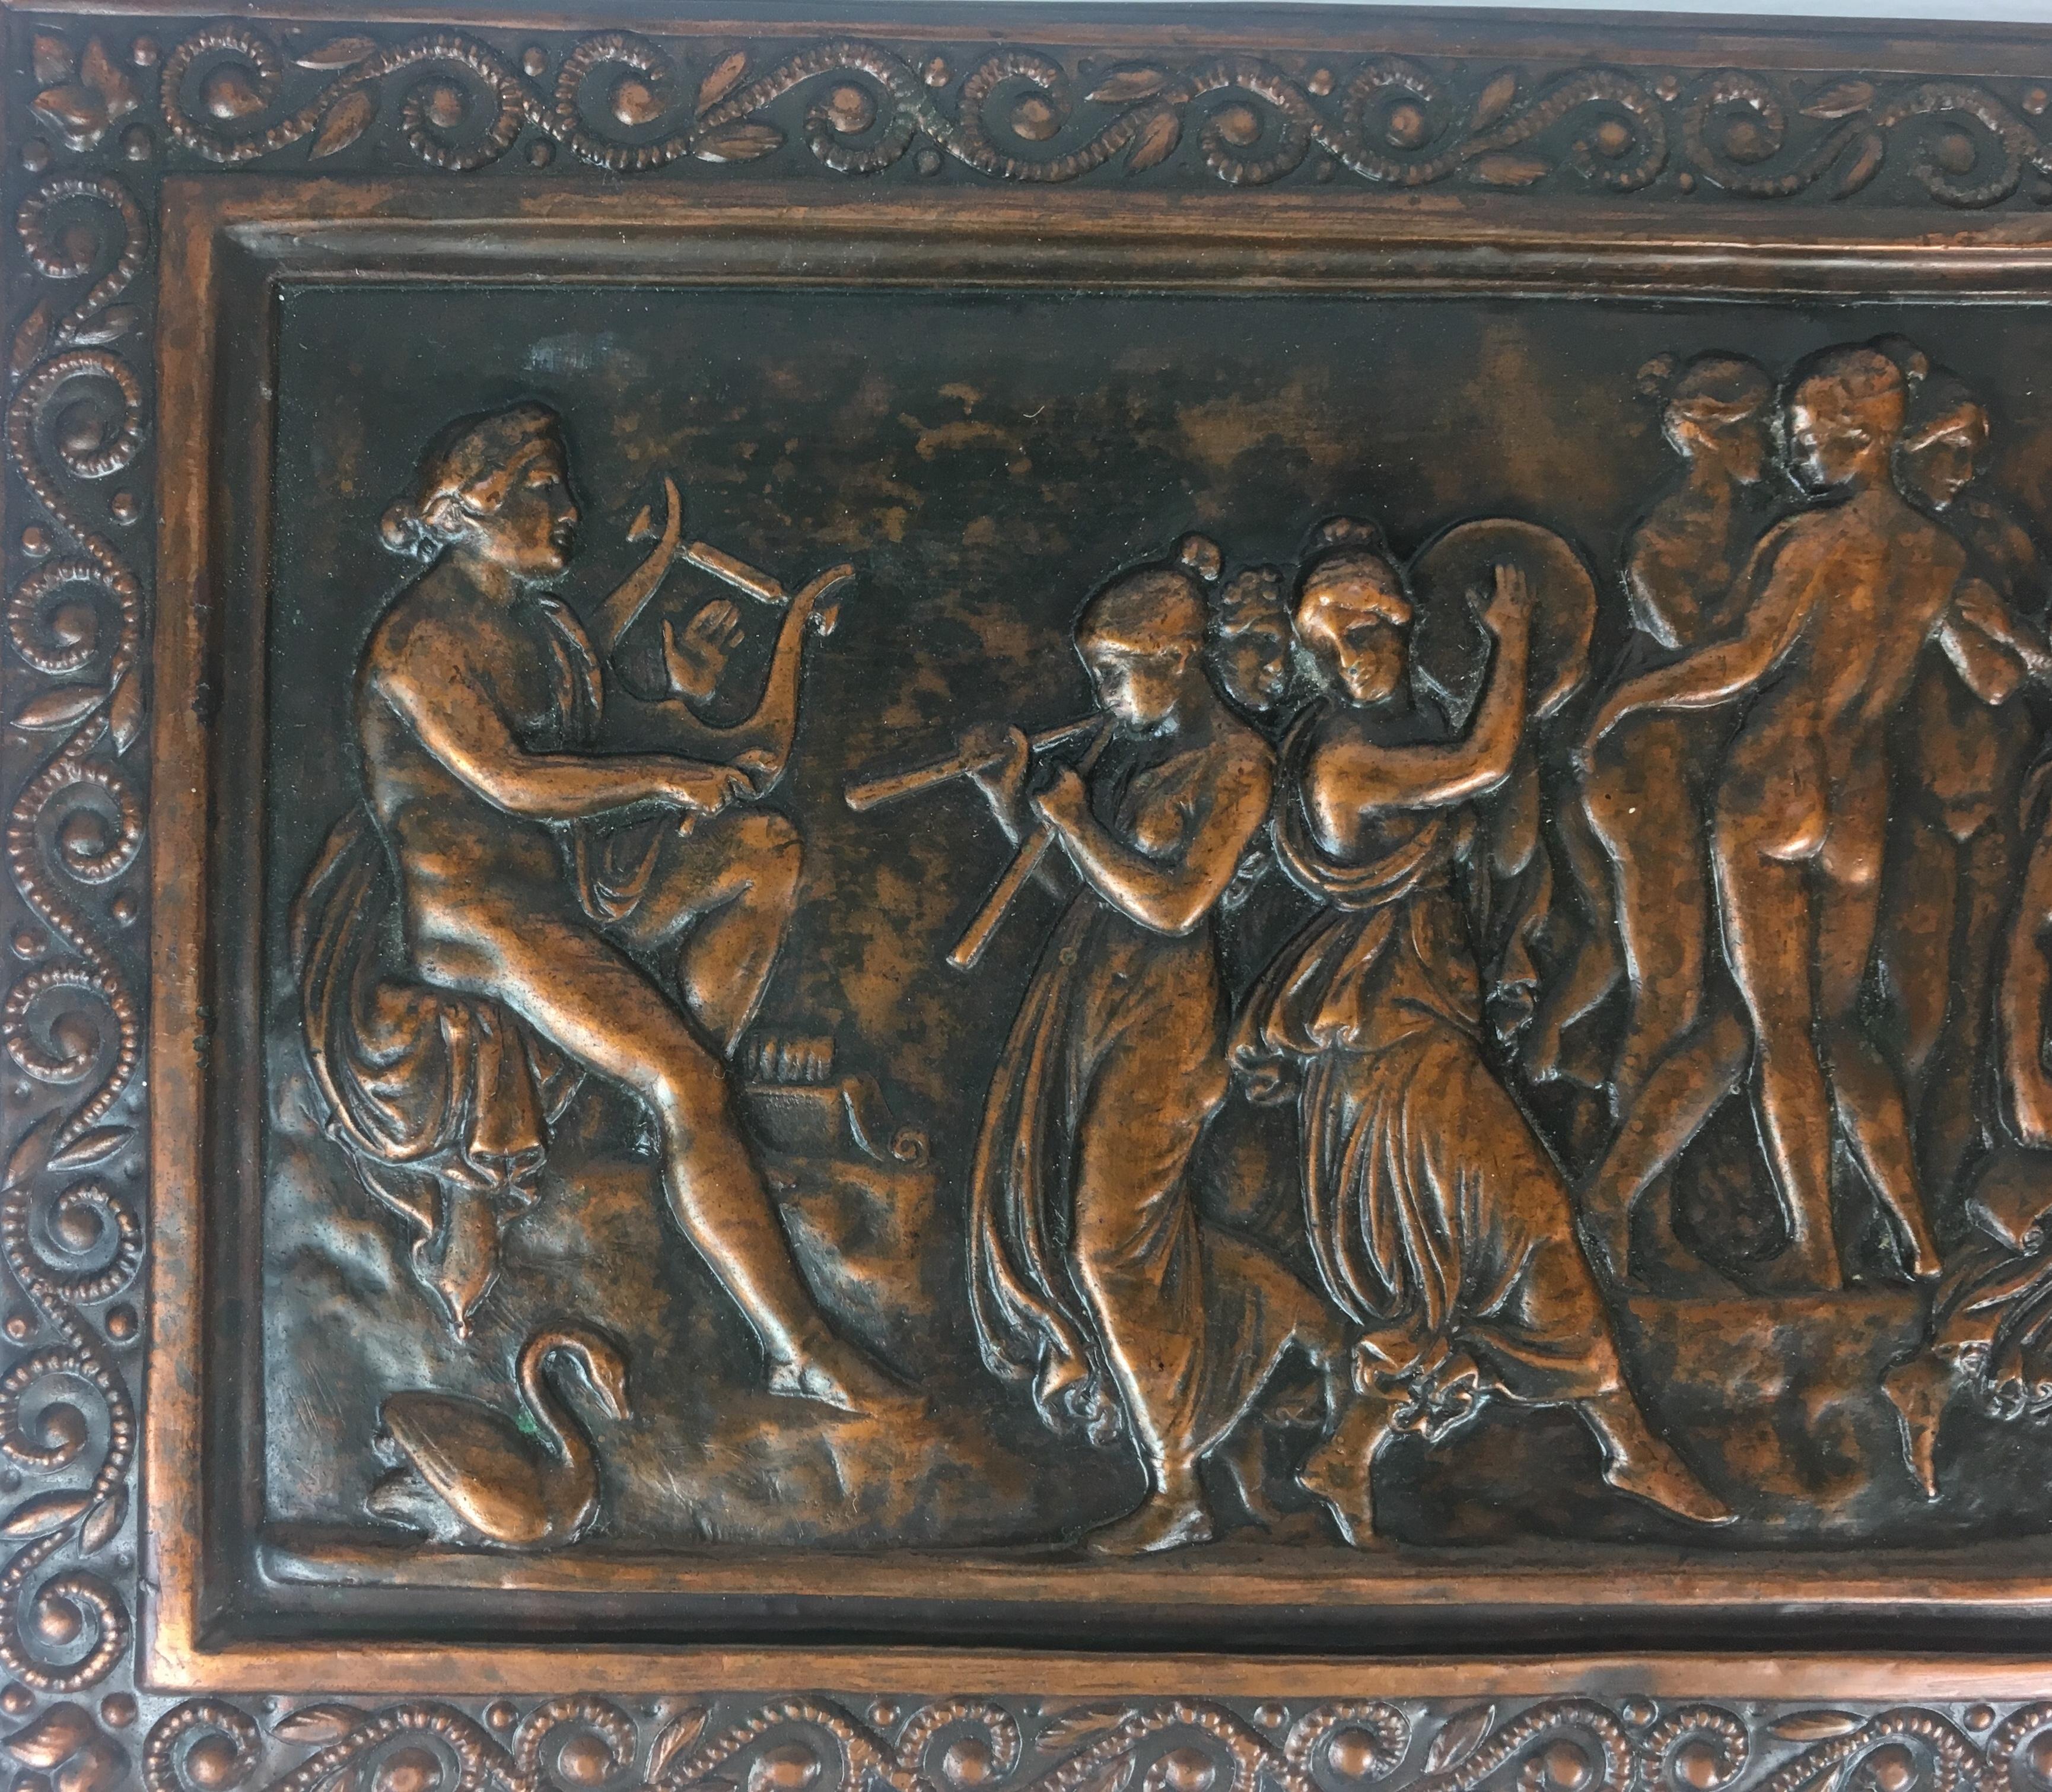 19th century French copper hand-hammered copper plaque depicting a celebration of women: musicians, bathers and others in period costumes.

The detailed work is beautiful. 
Professionally framed in Russia, 1980.